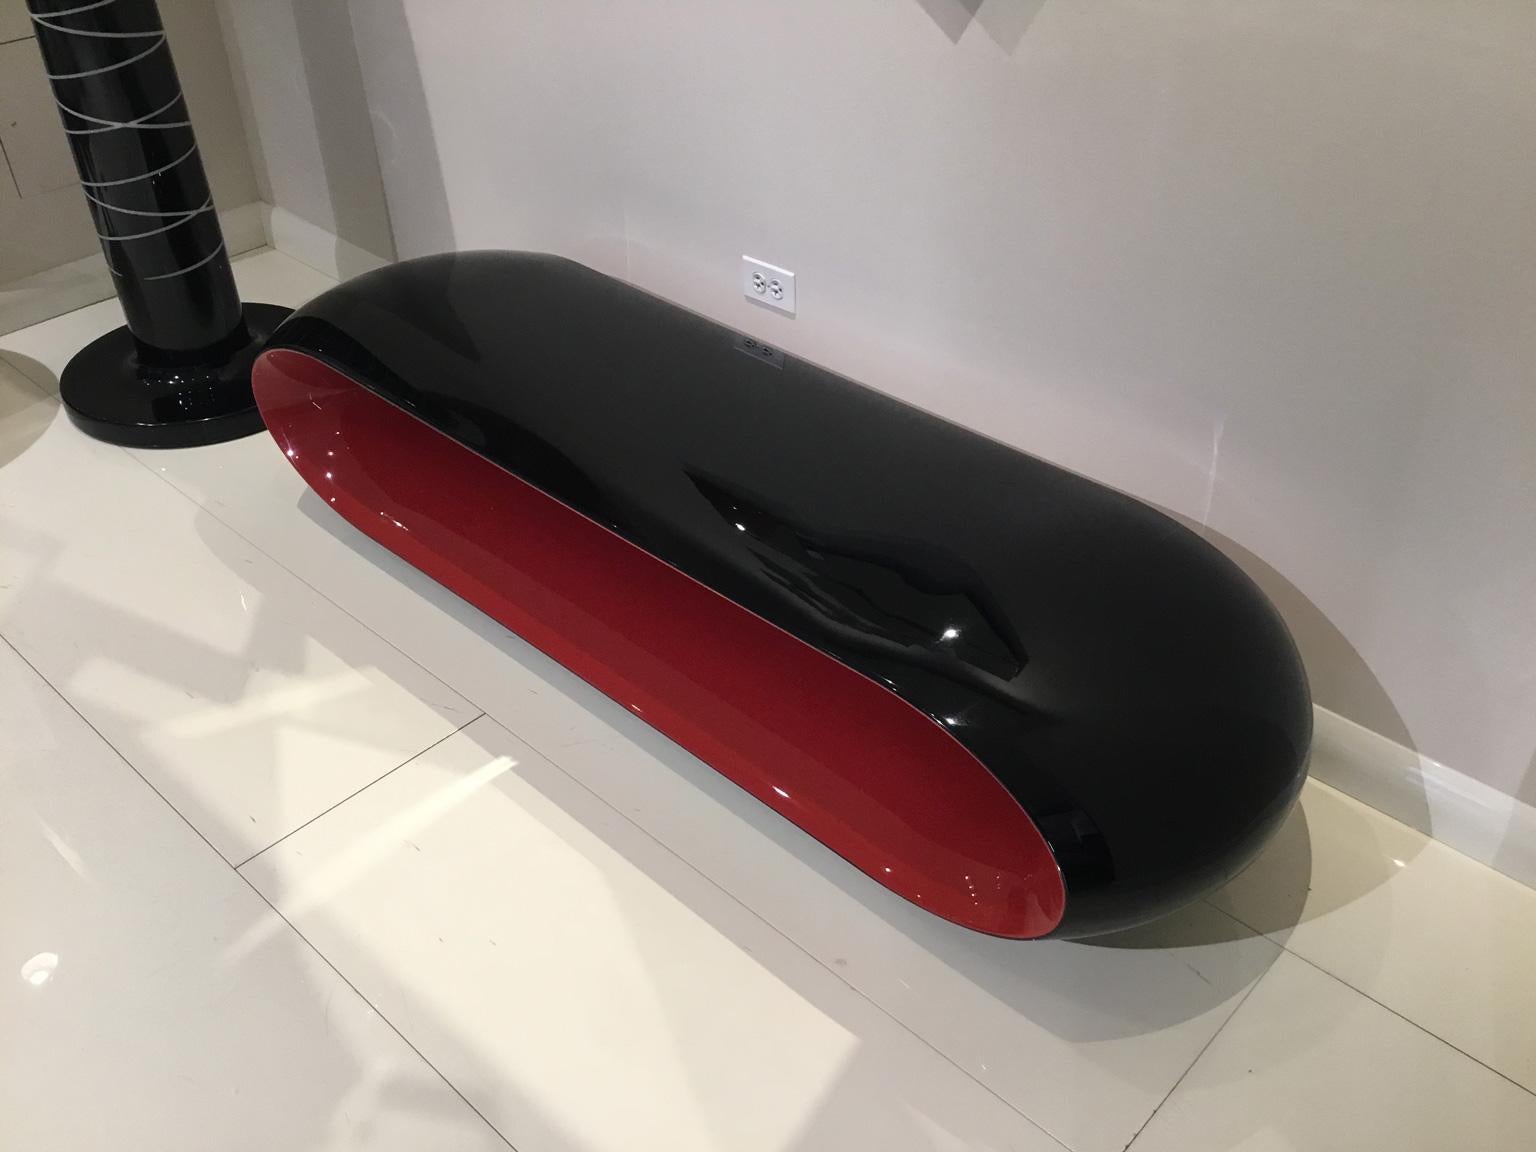 Loop bench by Christophe Pillet for Serralunga.

Indoor / outdoor bench in glossy black and red lacquer. Frame in LLDPE (linear low-density polyethylene). 

Dimensions:

180cm W x 50cm D x 40cm H
71